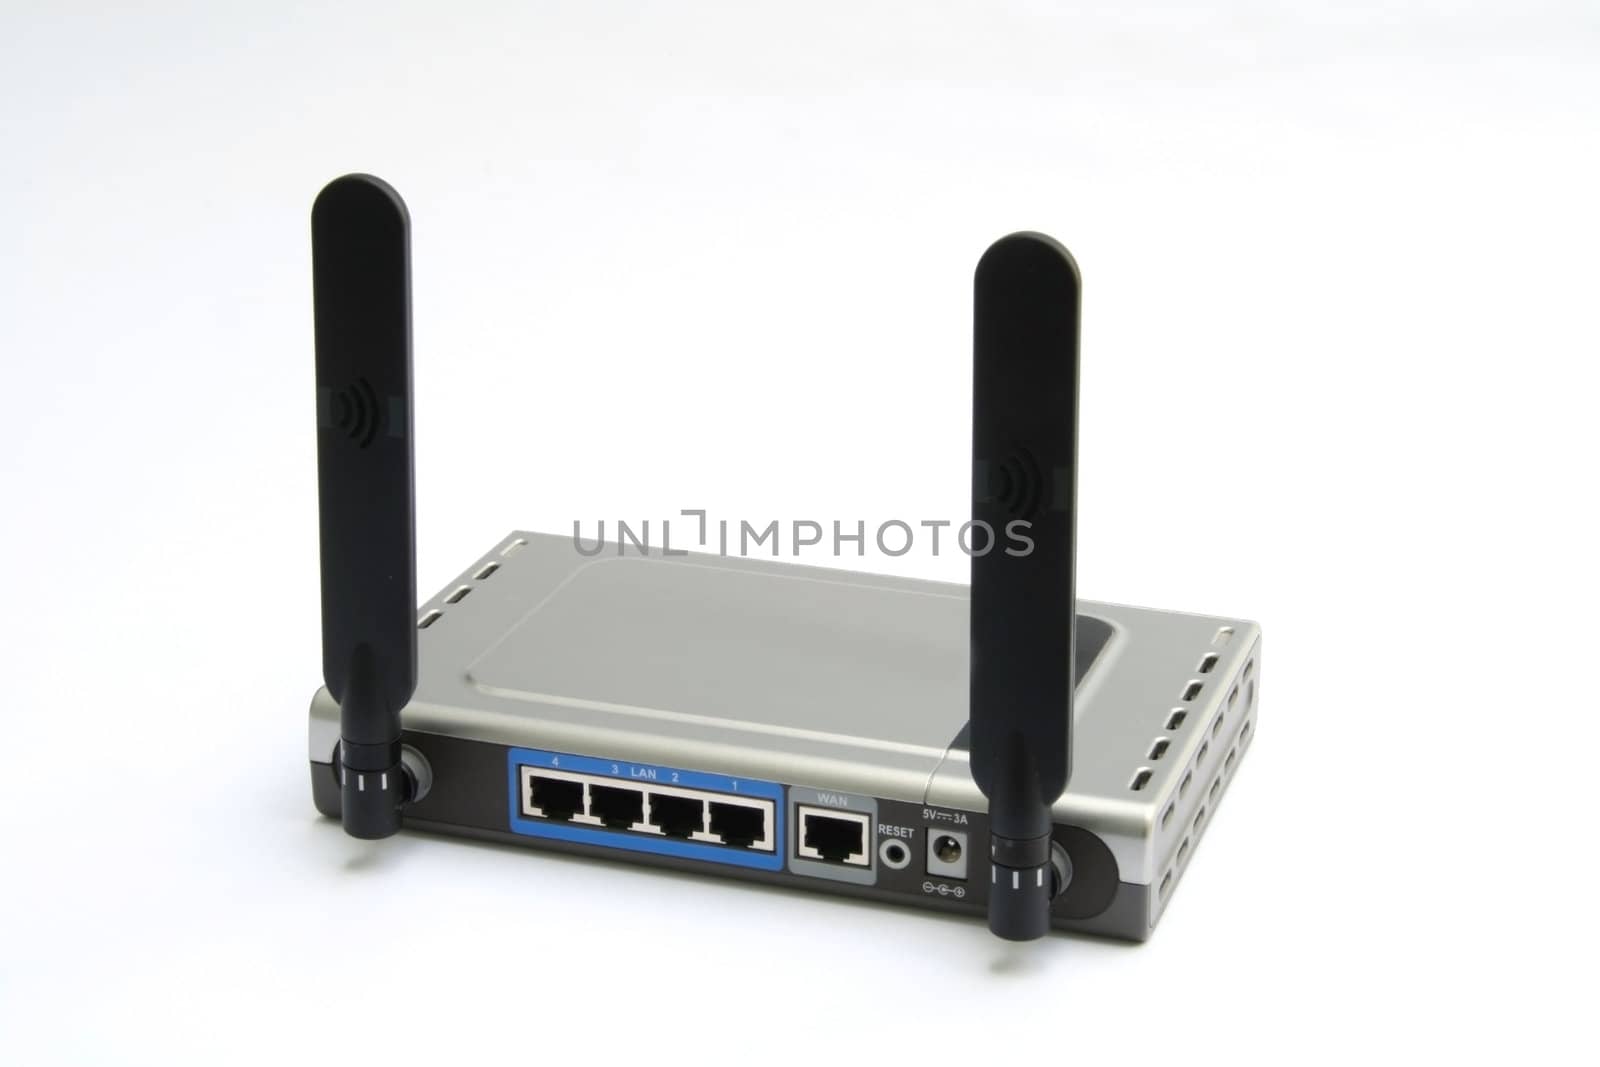 wireless modem and router isolated on white background
